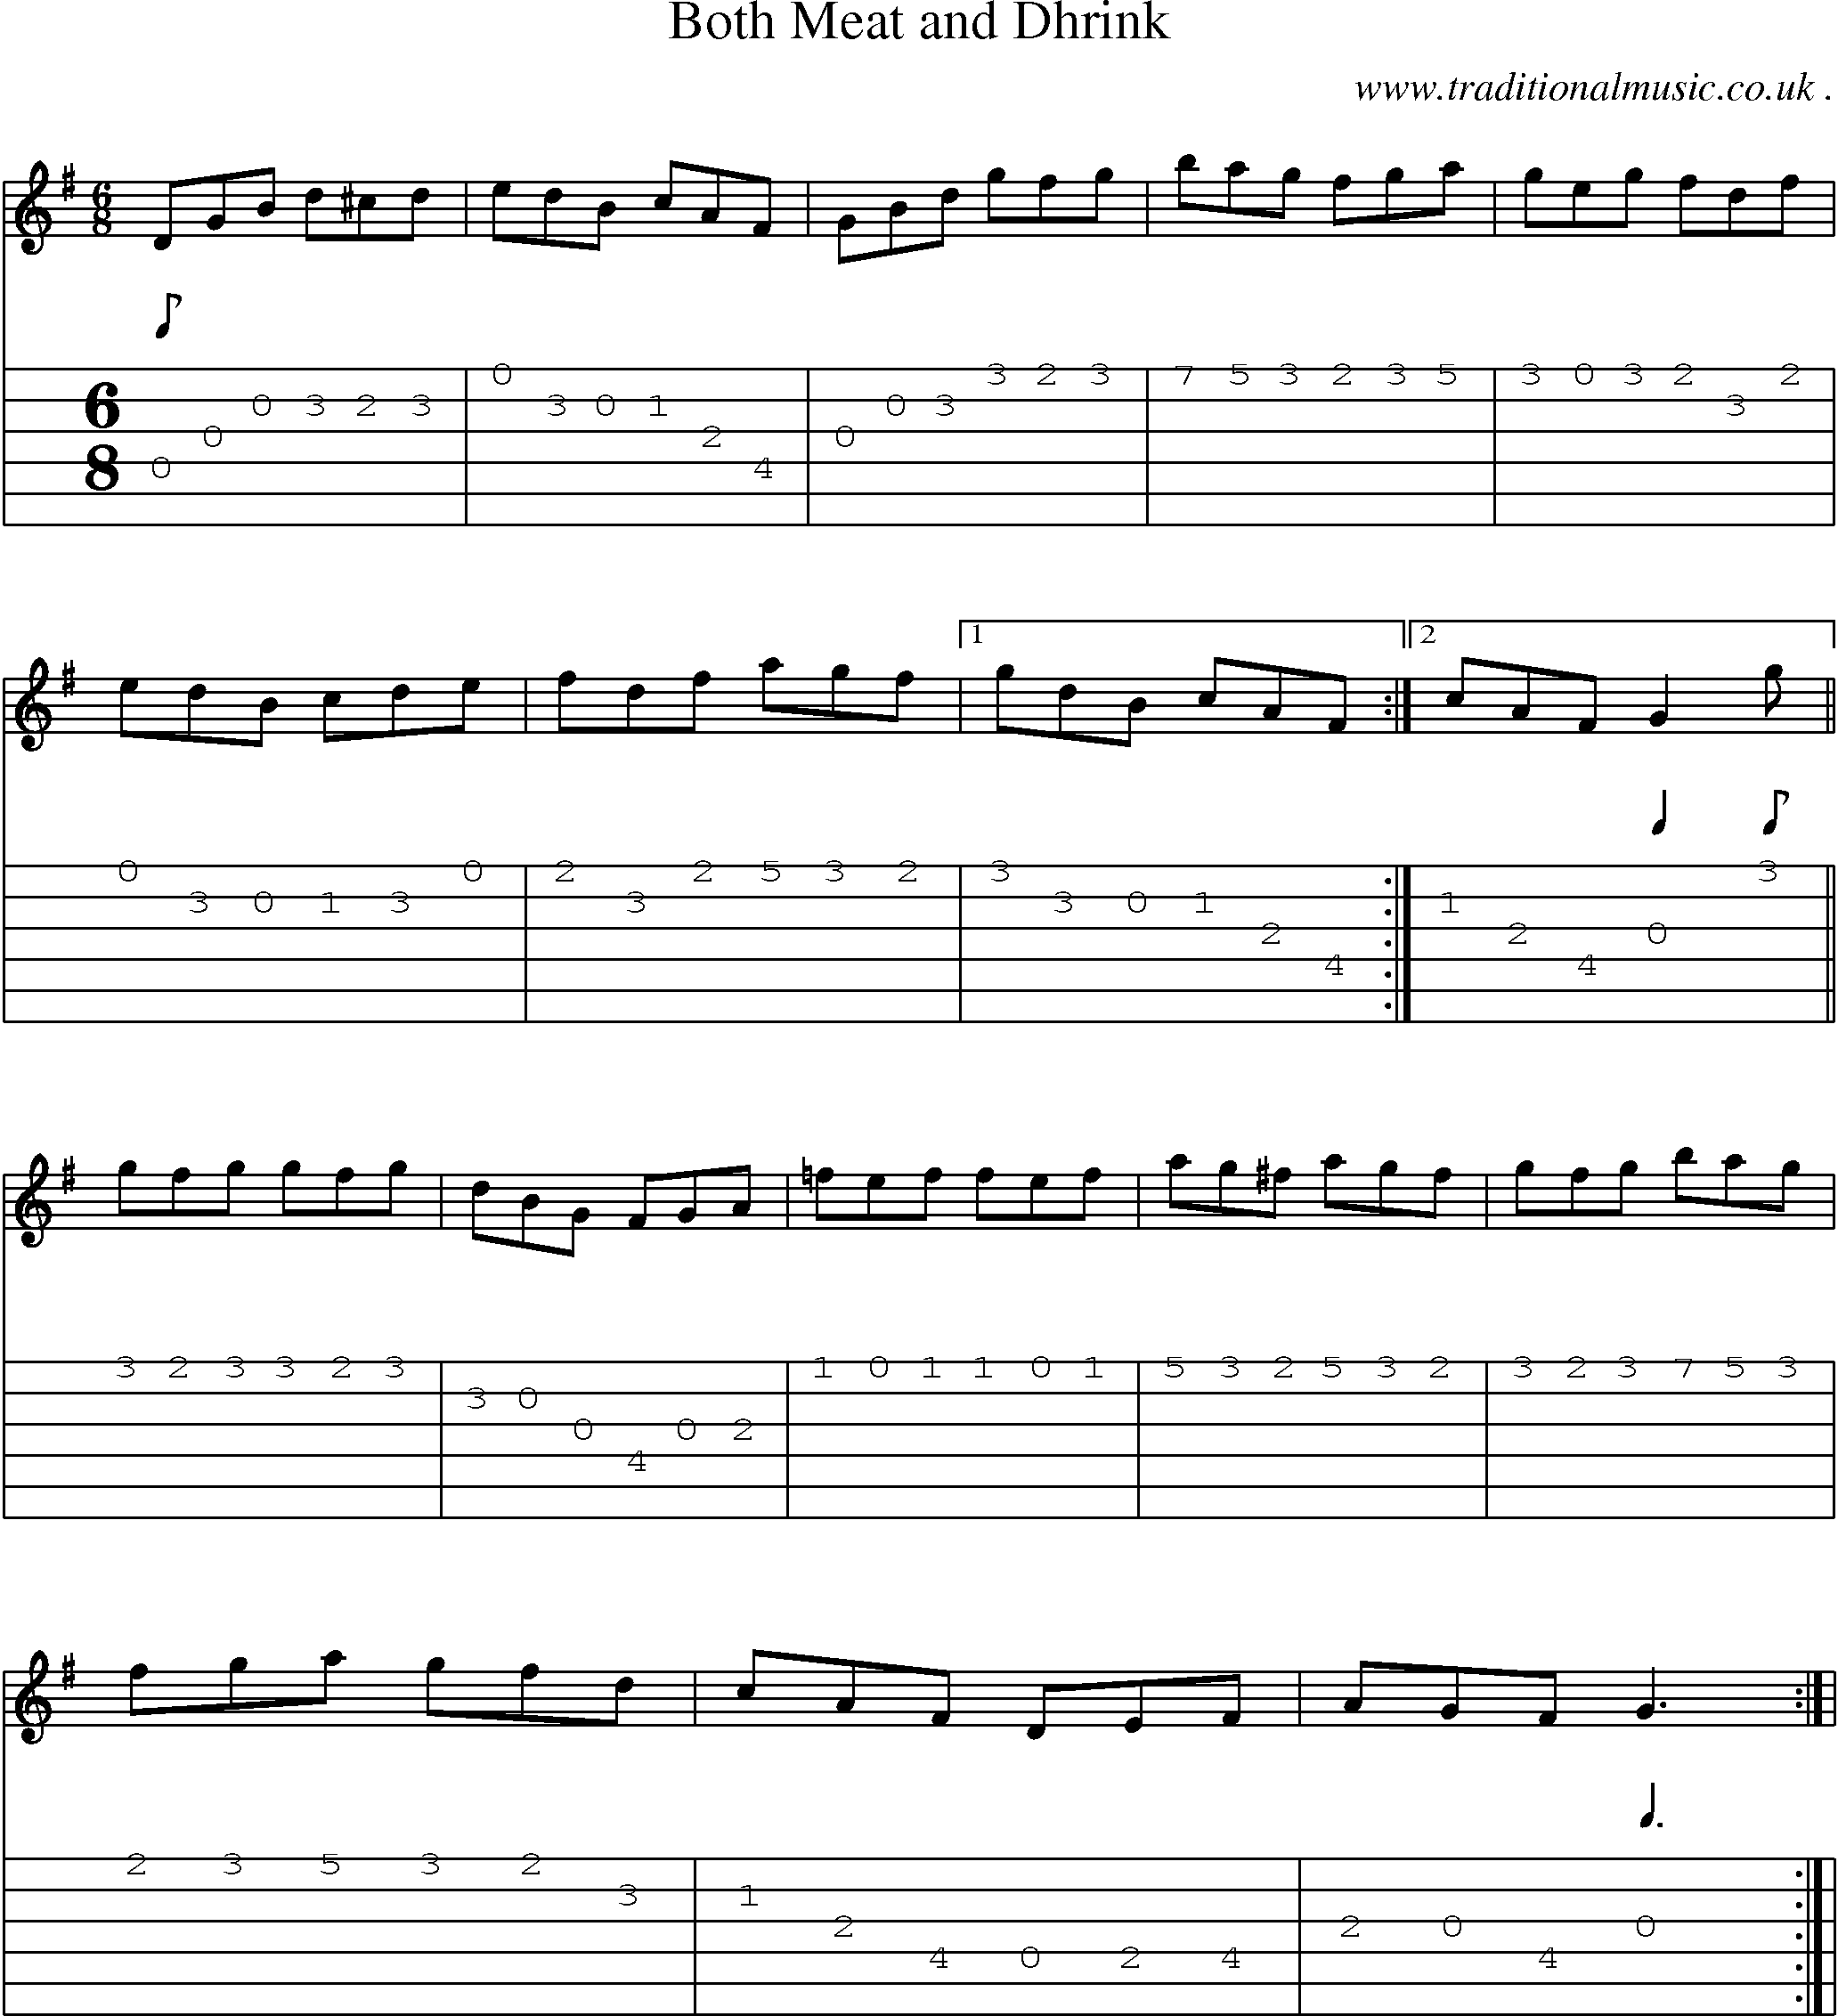 Sheet-Music and Guitar Tabs for Both Meat And Dhrink